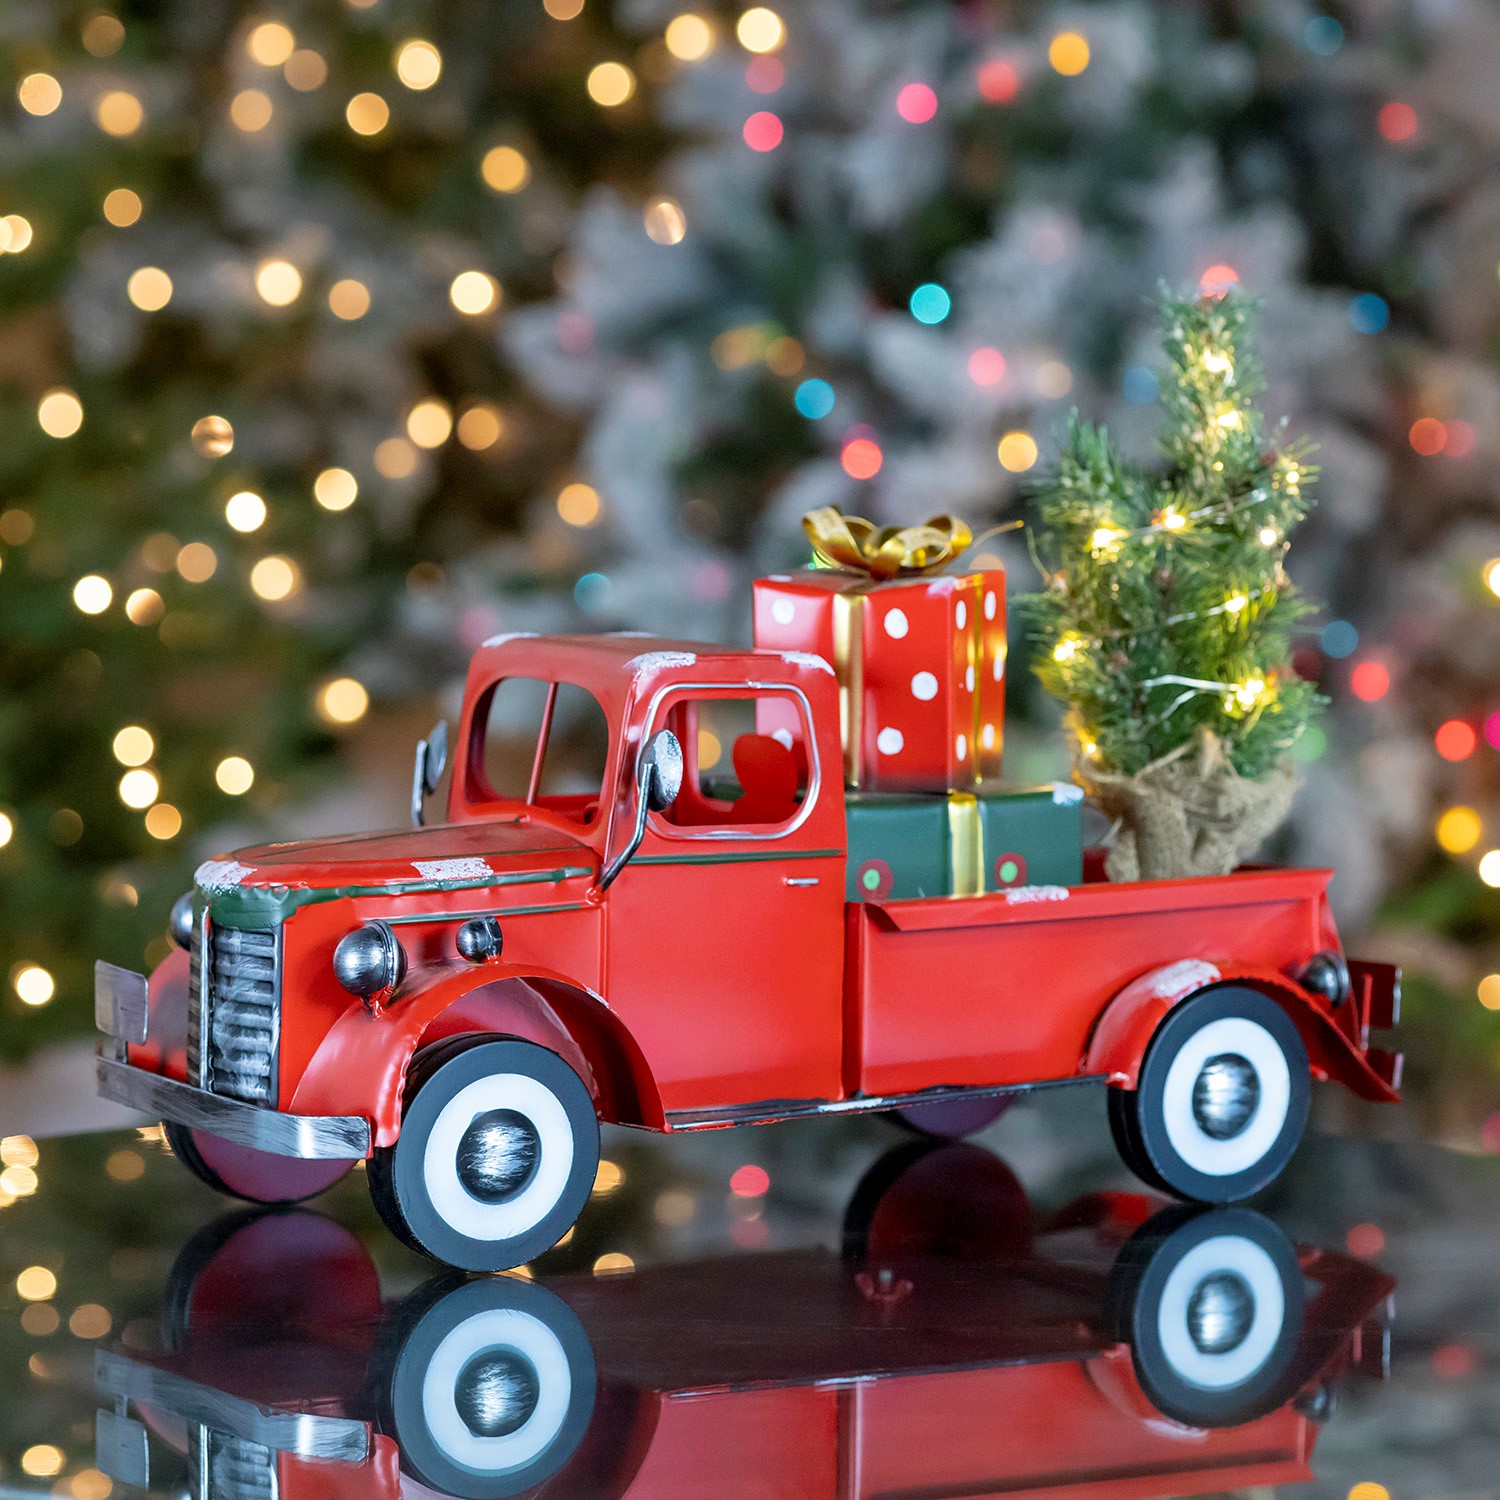 Snow Covered Pickup Truck with Lighted Christmas Tree and Gifts